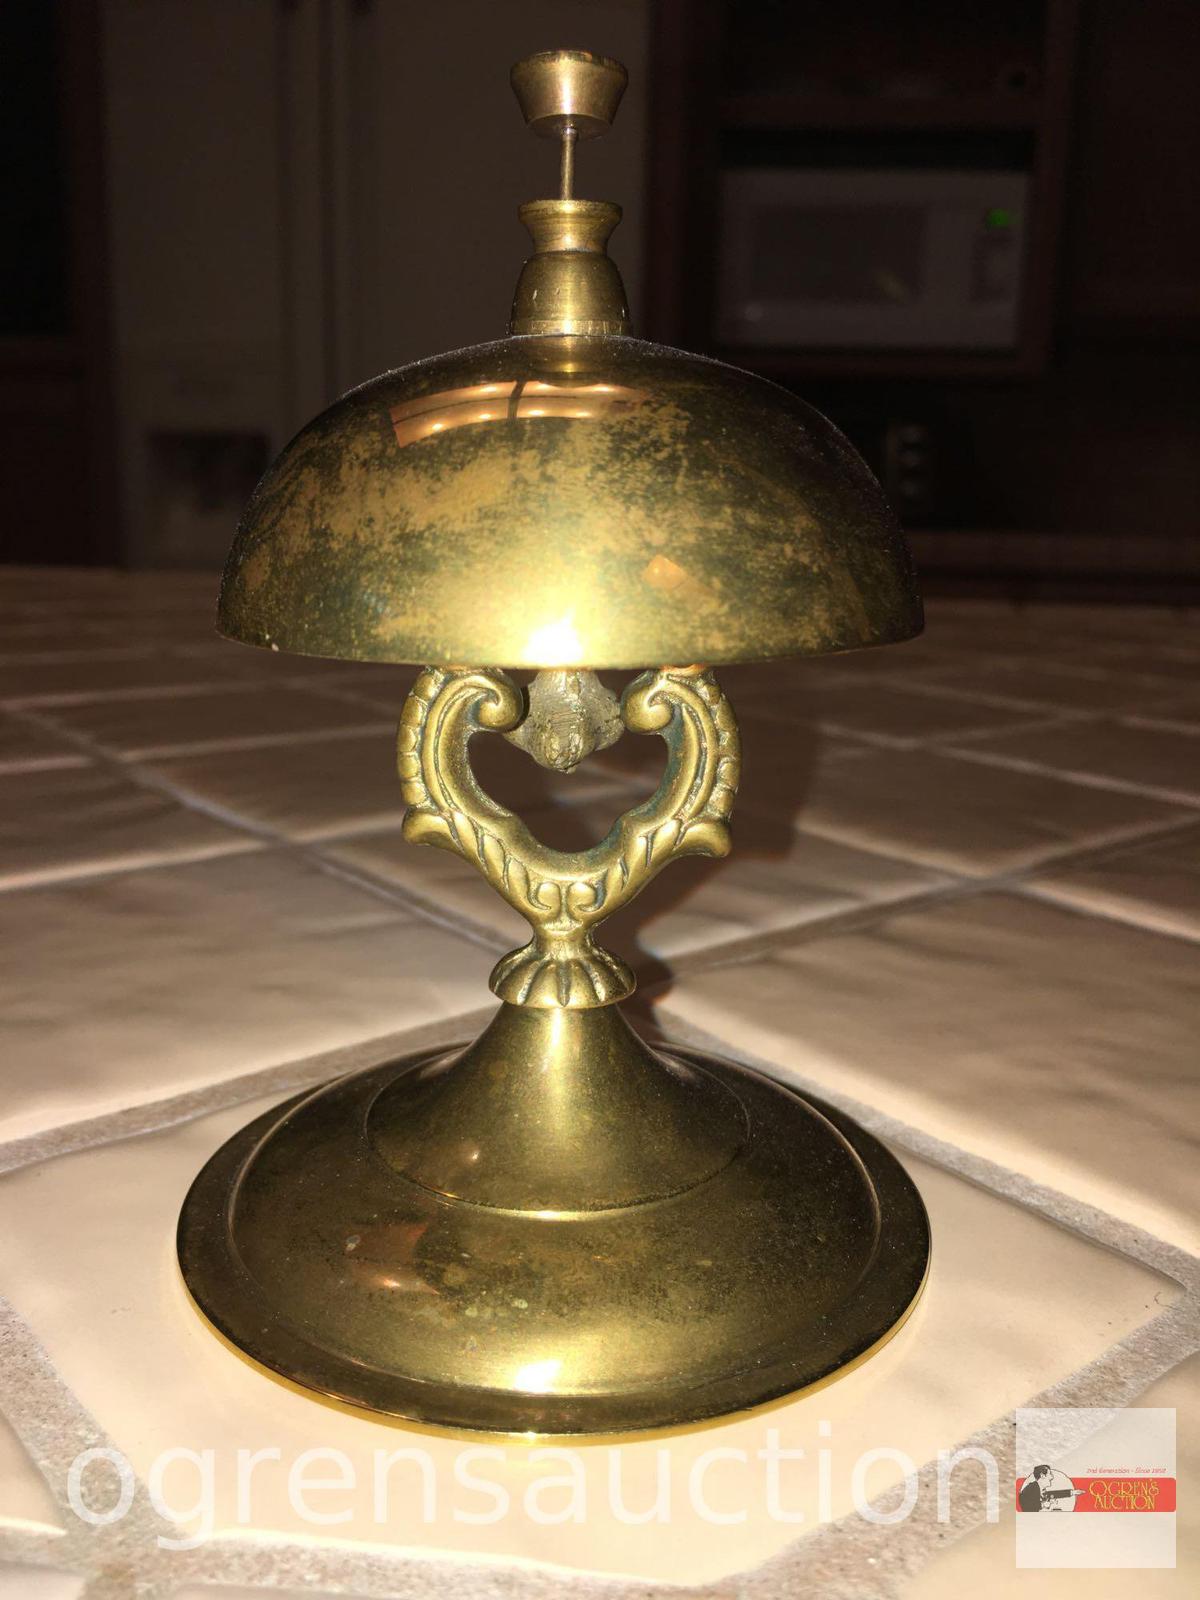 Bell - Gatco solid brass counter top general store bell